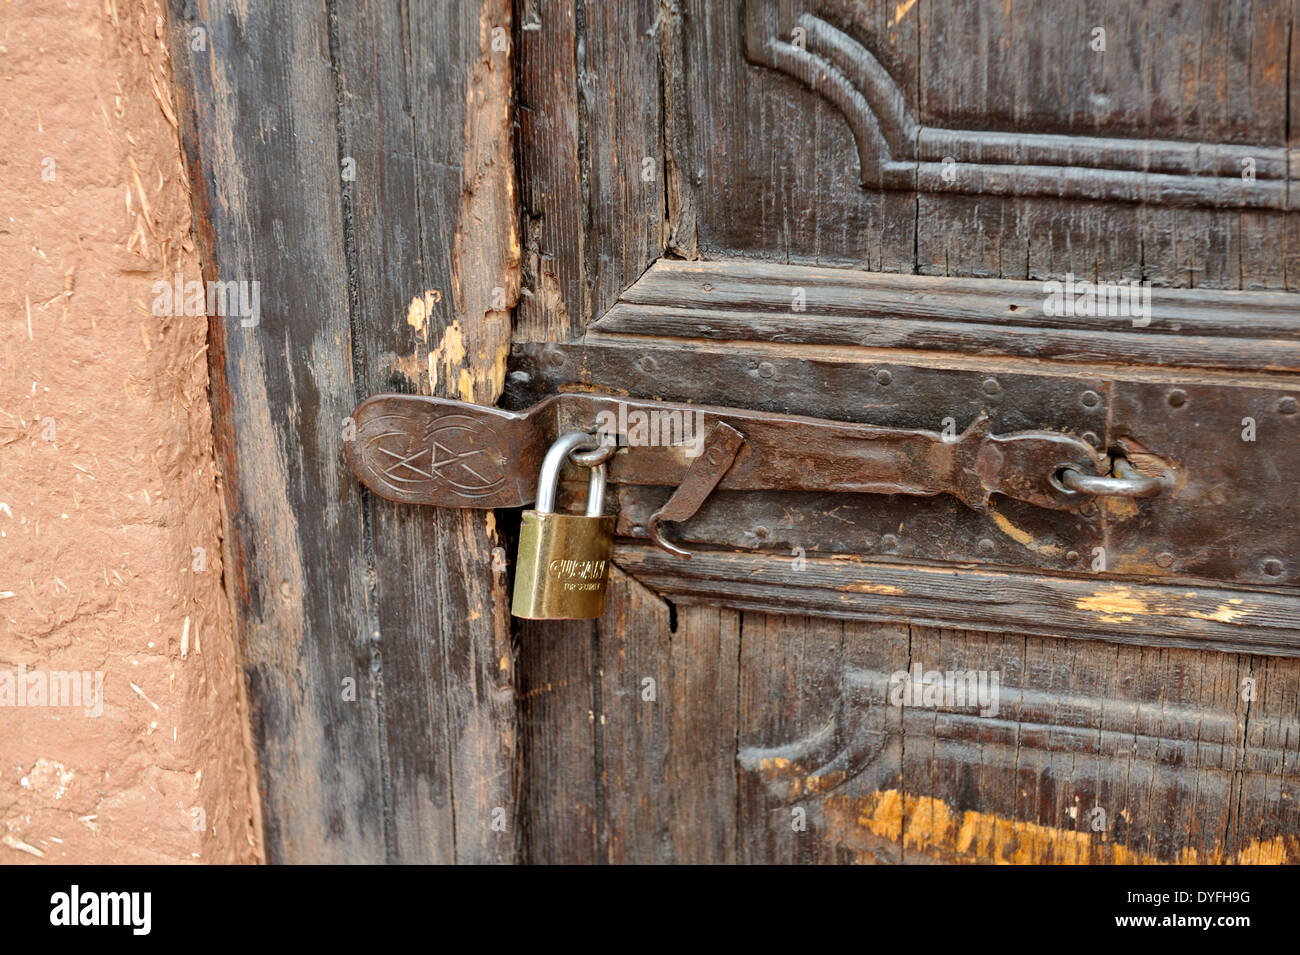 Locked and closed metal lock on old weathered wooden door Stock Photo